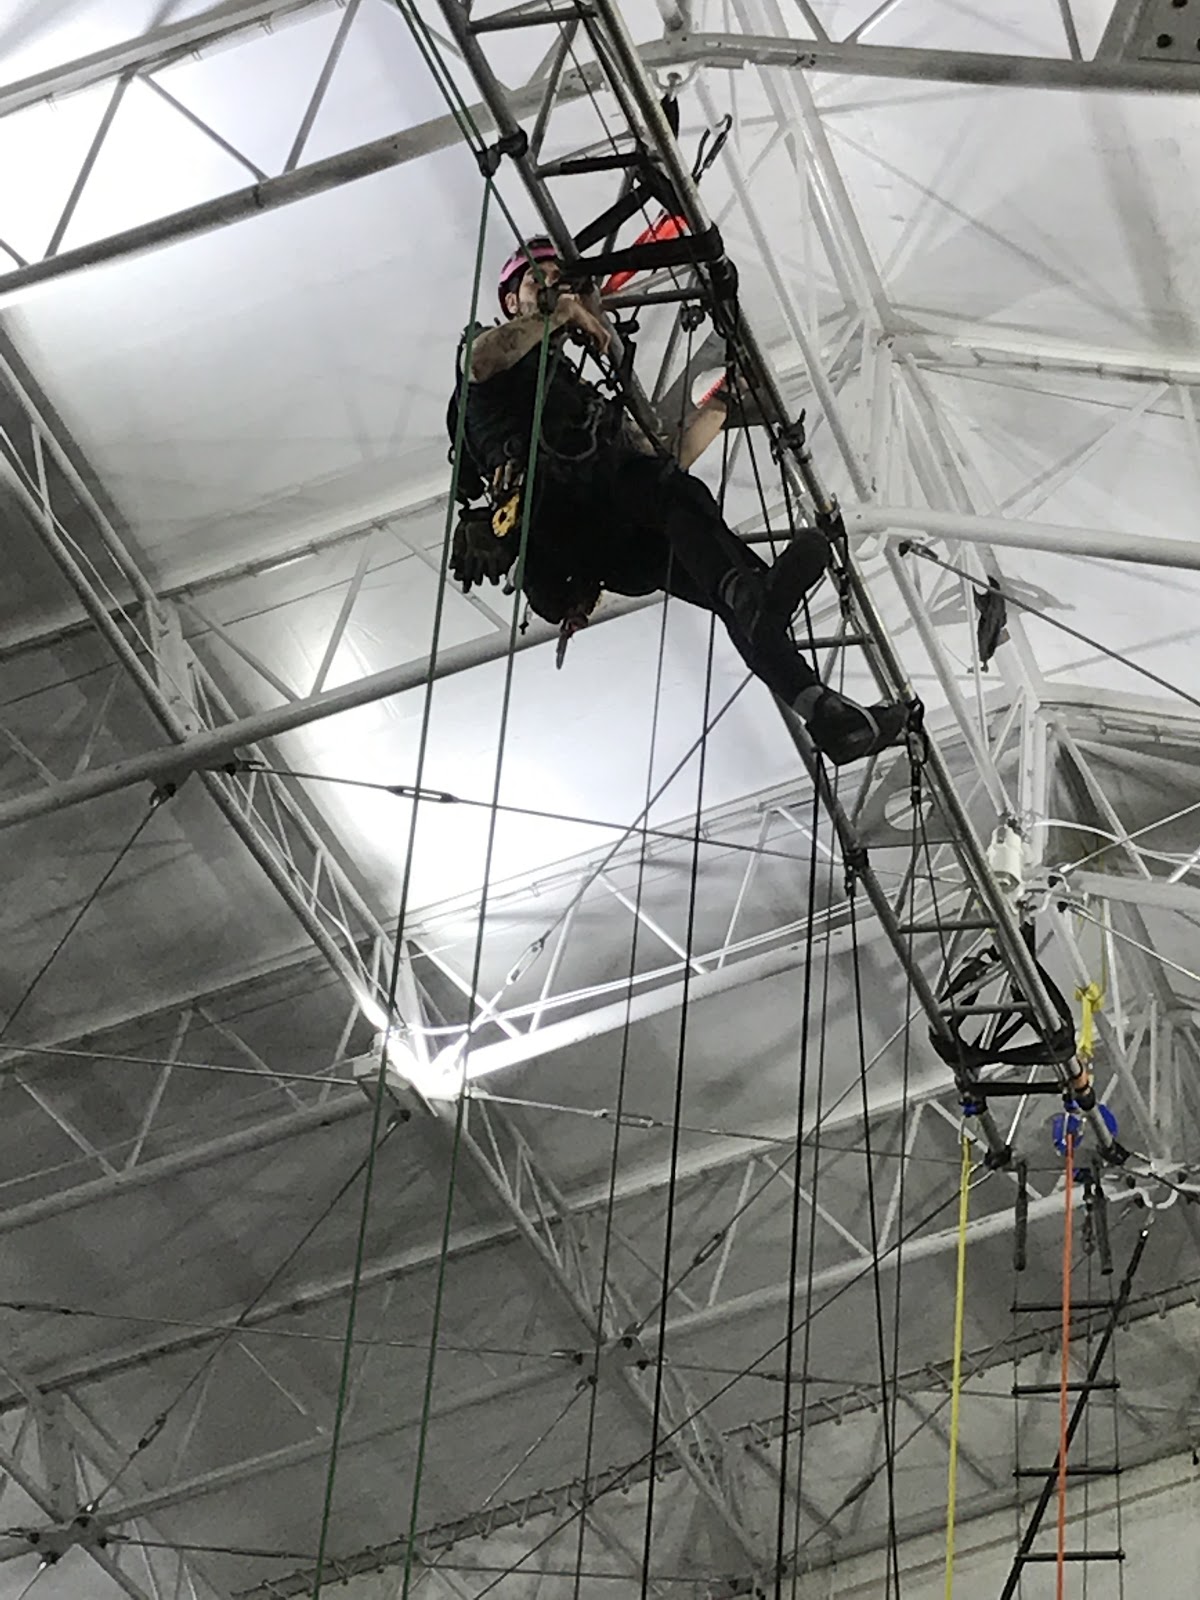 A rigger performs a rigging inspection in the ceiling